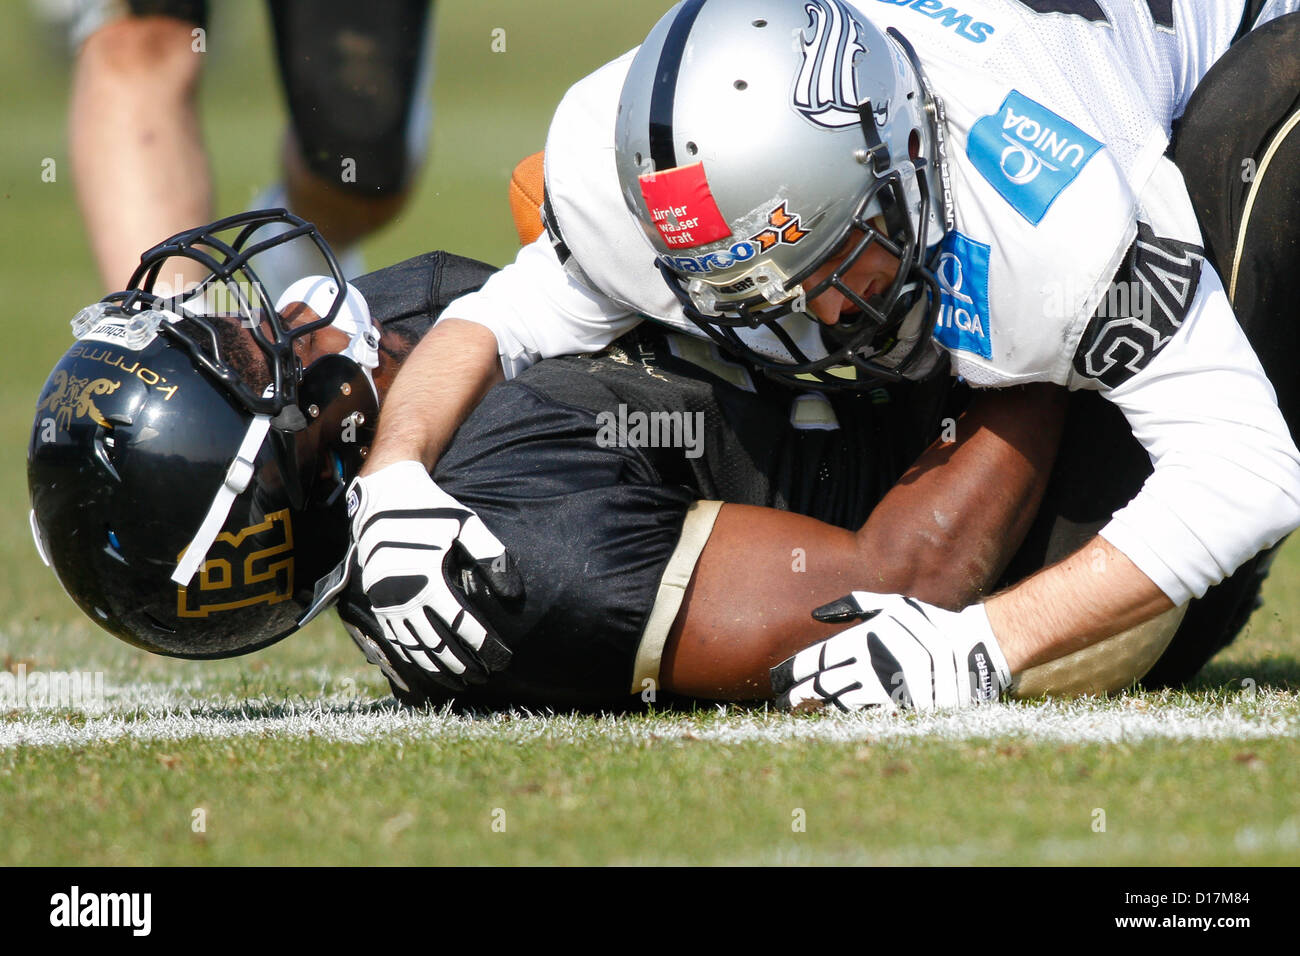 Zacchaeus Mccaskill (#3 Rangers) is tackled by LB Julian Hackl (#34 Raiders) on March 24, 2012 in Vienna, Austria. Stock Photo